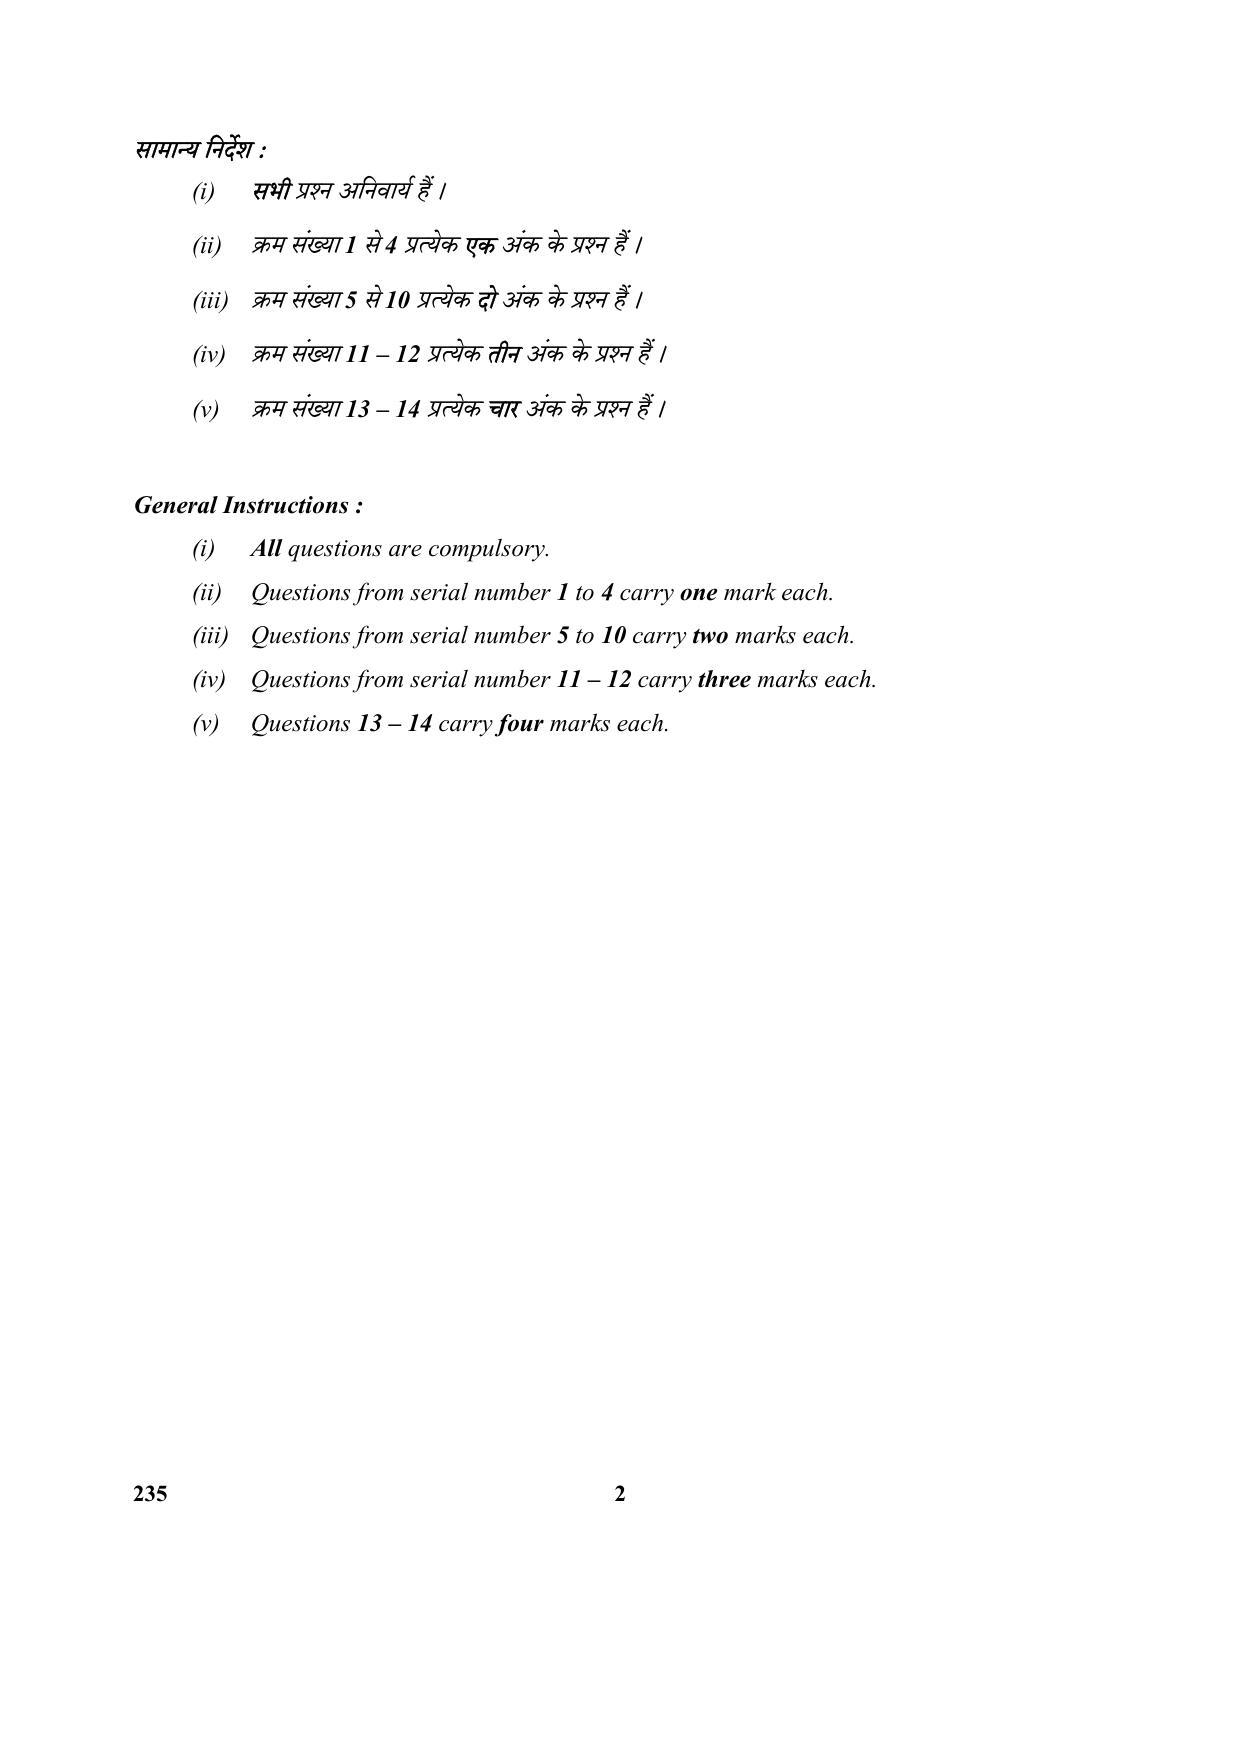 CBSE Class 10 235 Elements of Bookkeeping & Accountancy (Commerce) 2018 Question Paper - Page 2